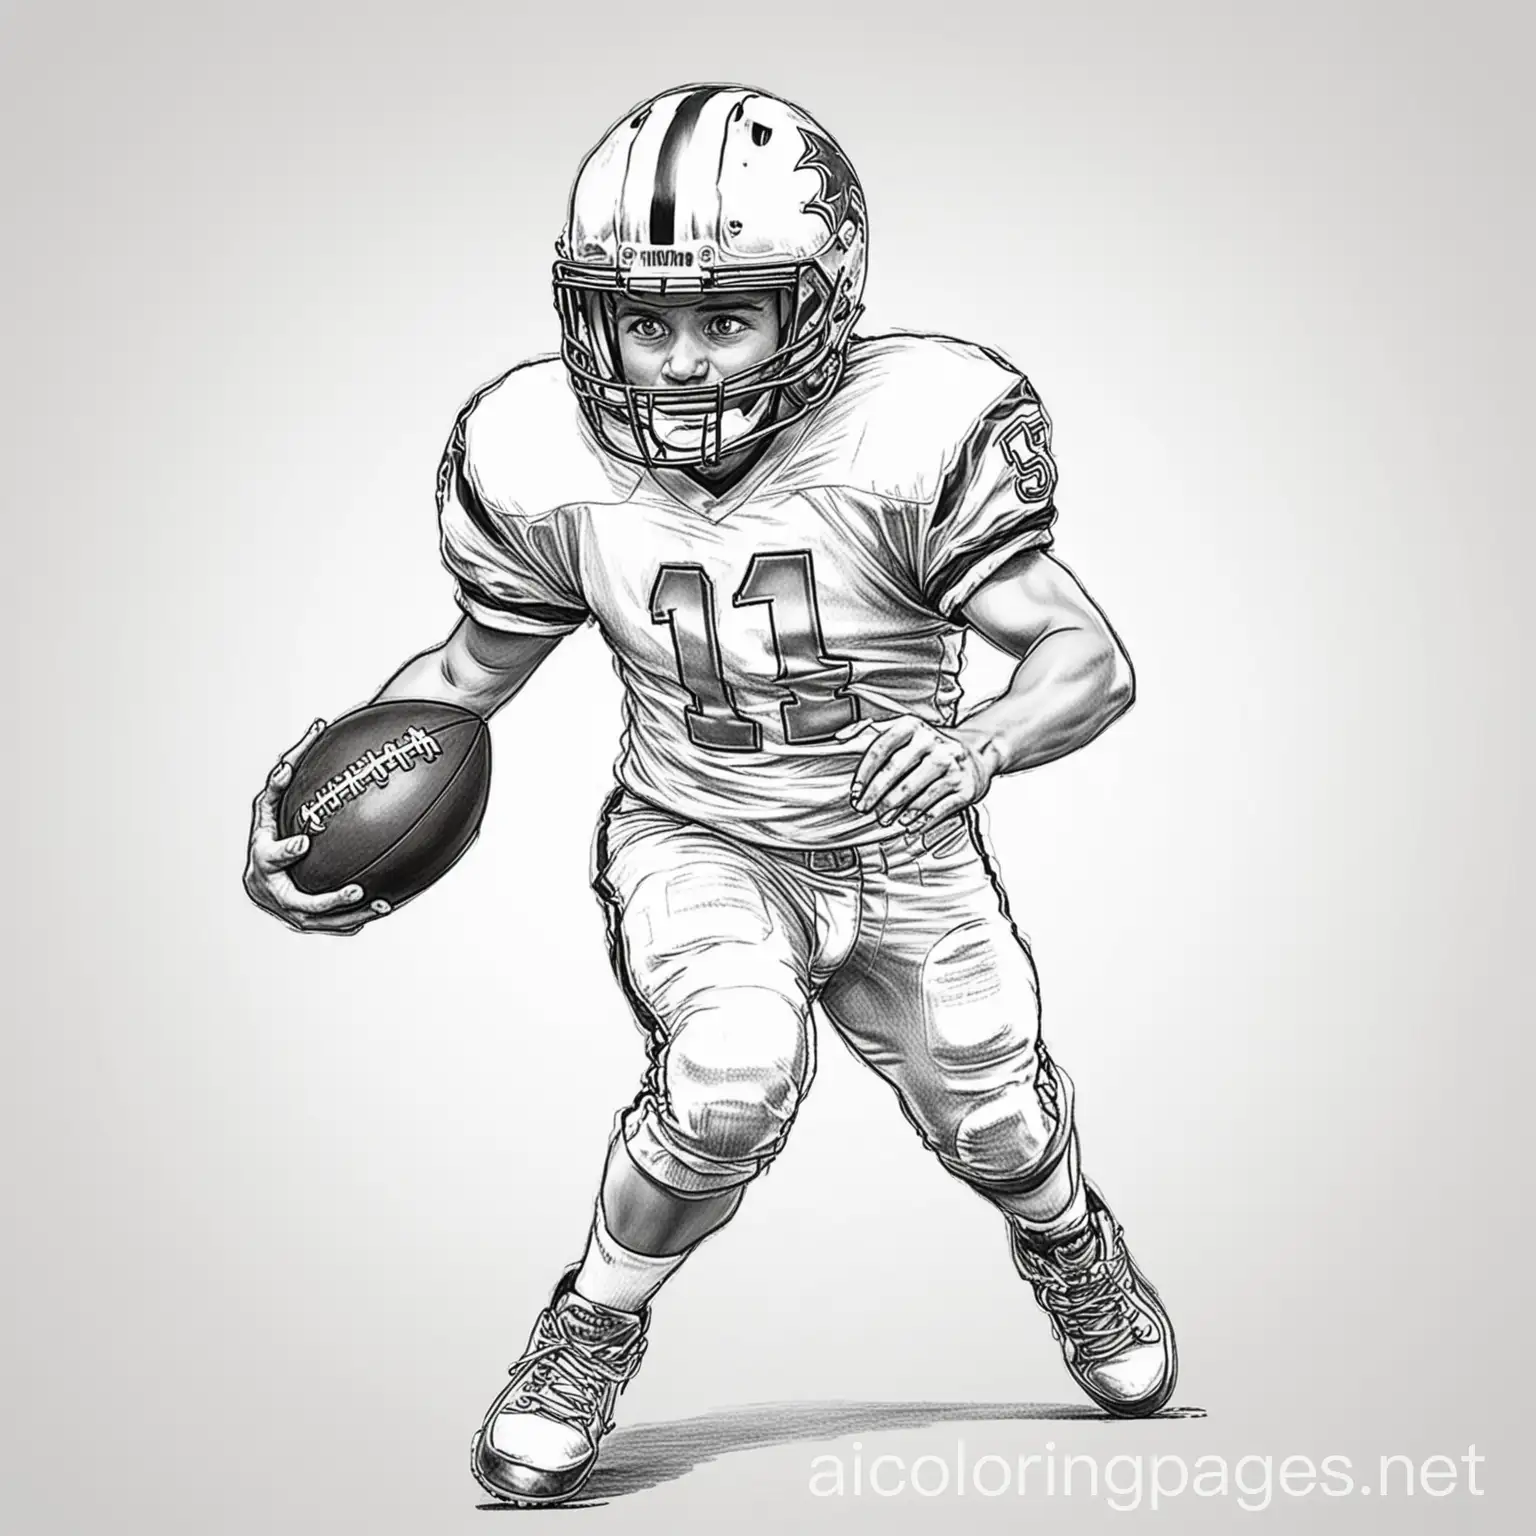 boy playing American football ample white space, Coloring Page, black and white, line art, white background, Simplicity, Ample White Space. The background of the coloring page is plain white to make it easy for young children to color within the lines. The outlines of all the subjects are easy to distinguish, making it simple for kids to color without too much difficulty